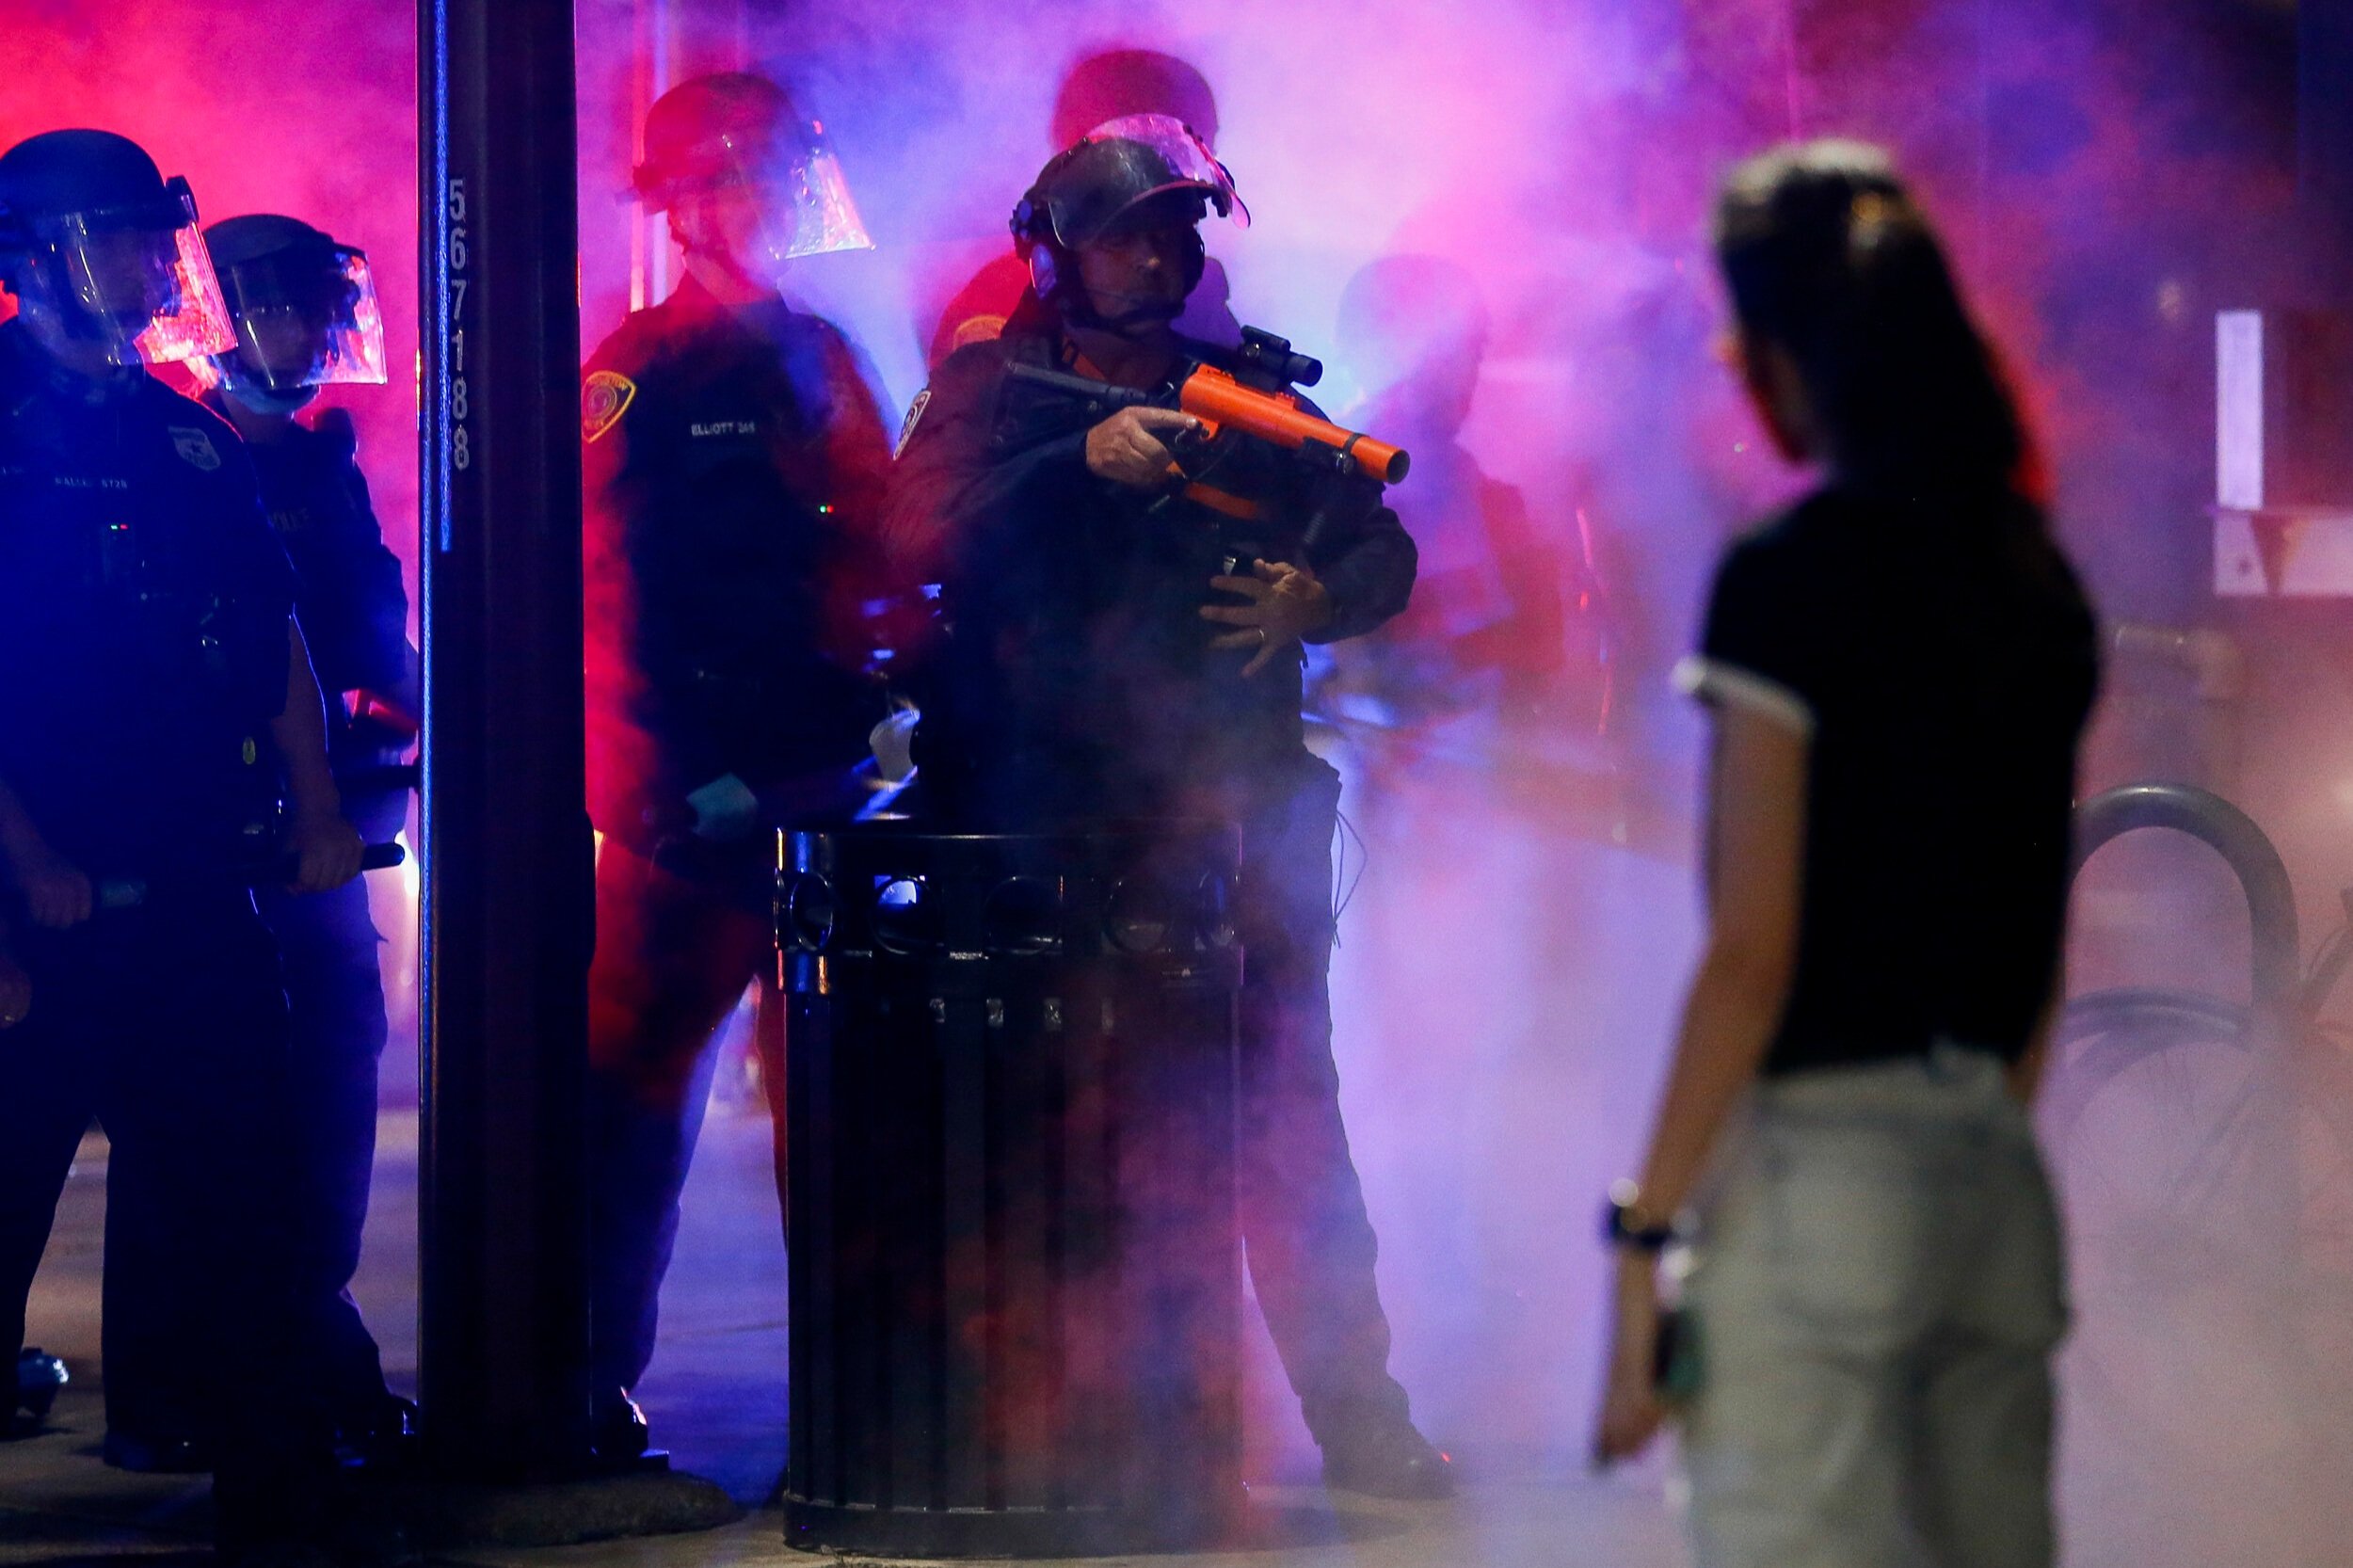  Houston Police block off Smith Street to prevent demonstrators from heading west on Preston Street during a march to protest the death of Houston resident George Floyd on Saturday, May 30, 2020, in Houston, Texas. Floyd died while in custody of the 